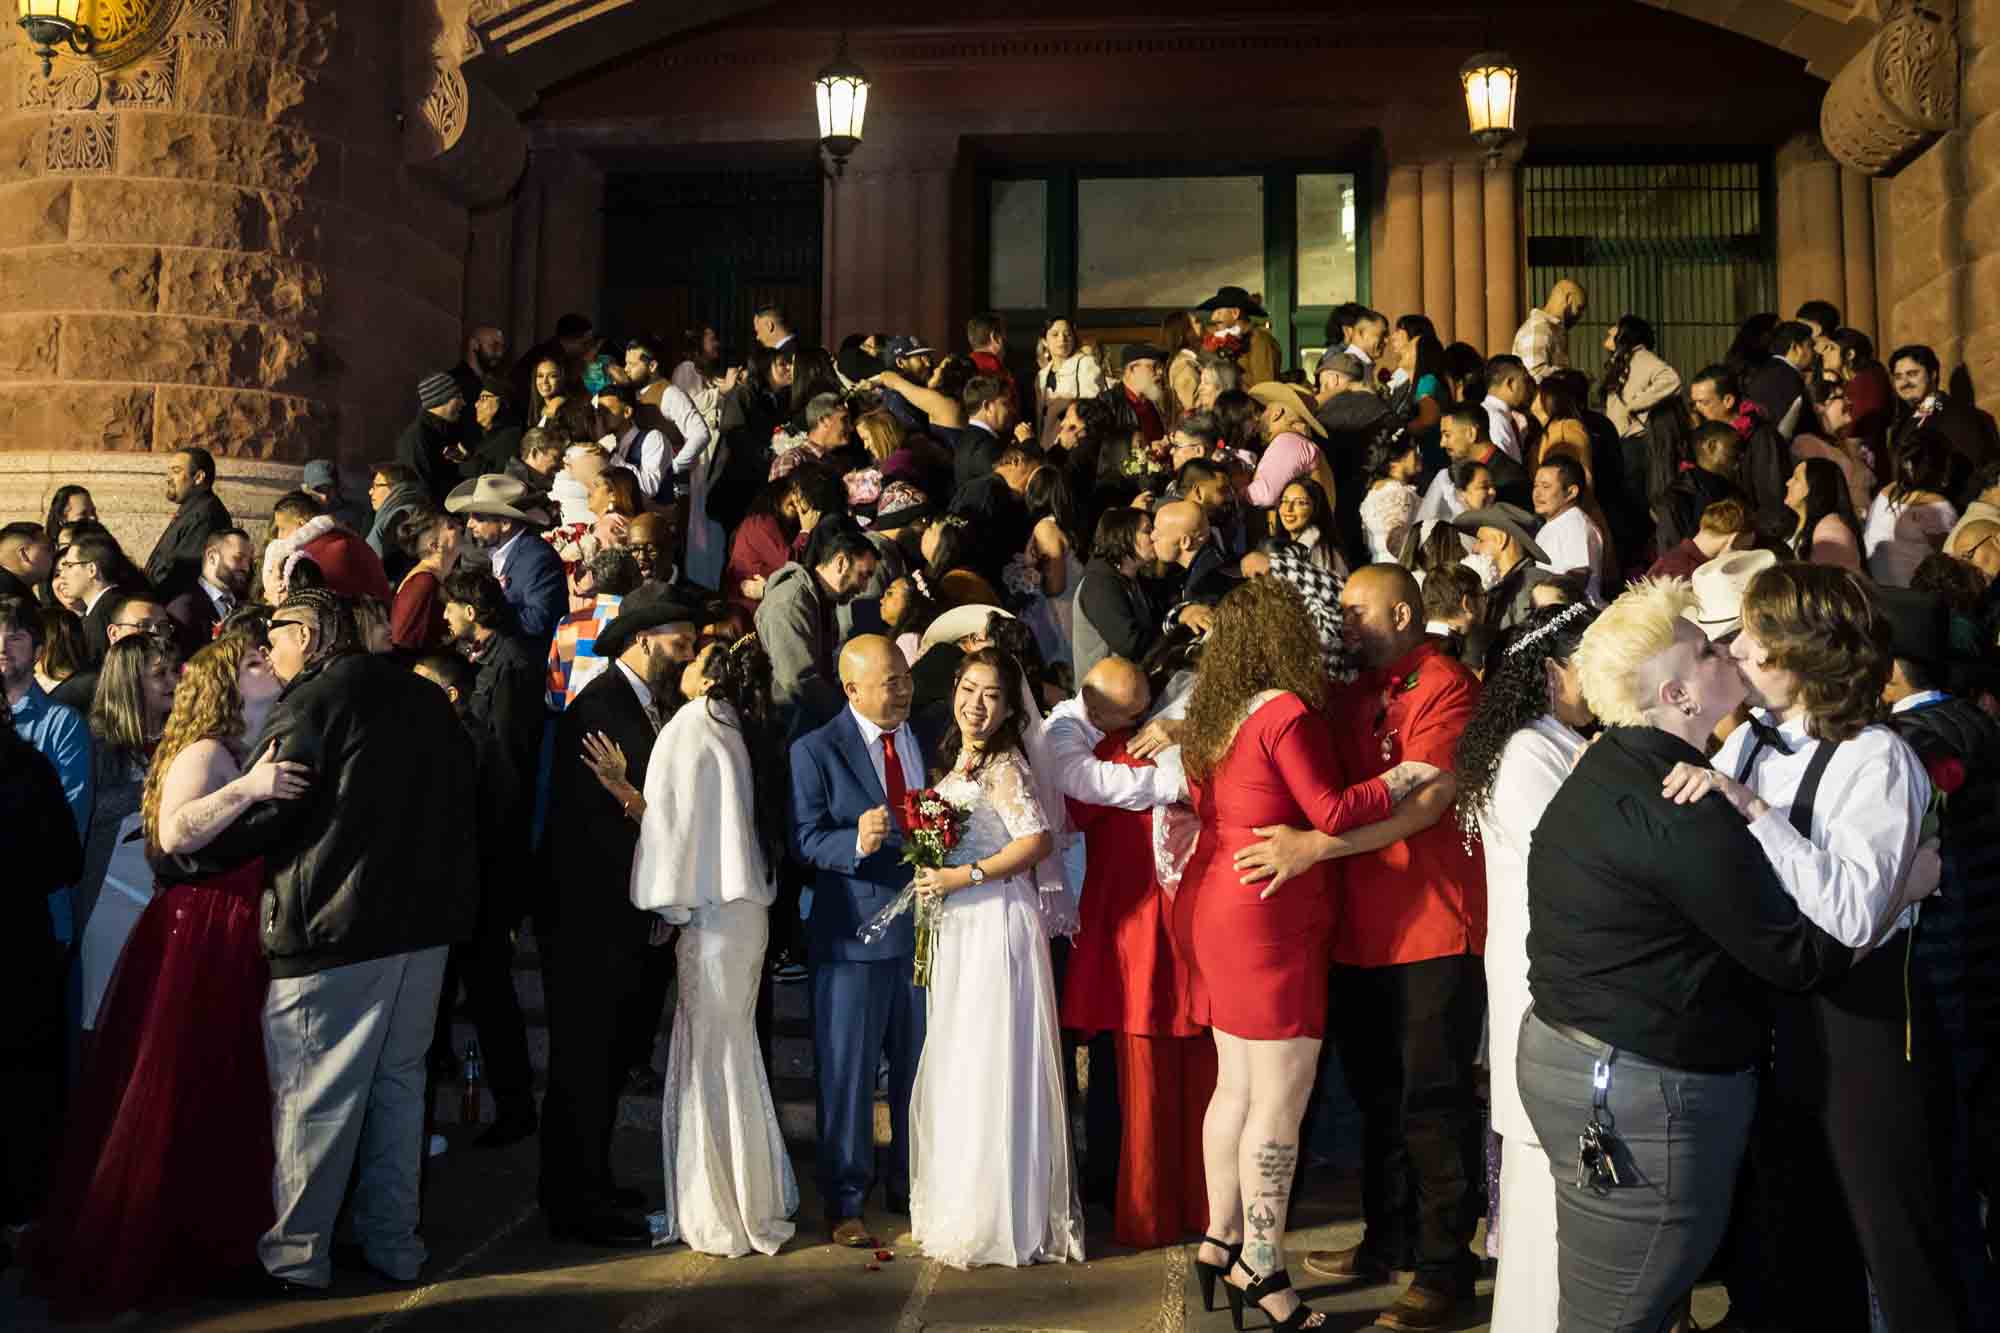 Crowd of bride and grooms standing in front of courthouse steps at night for an article on the Bexar county mass wedding event